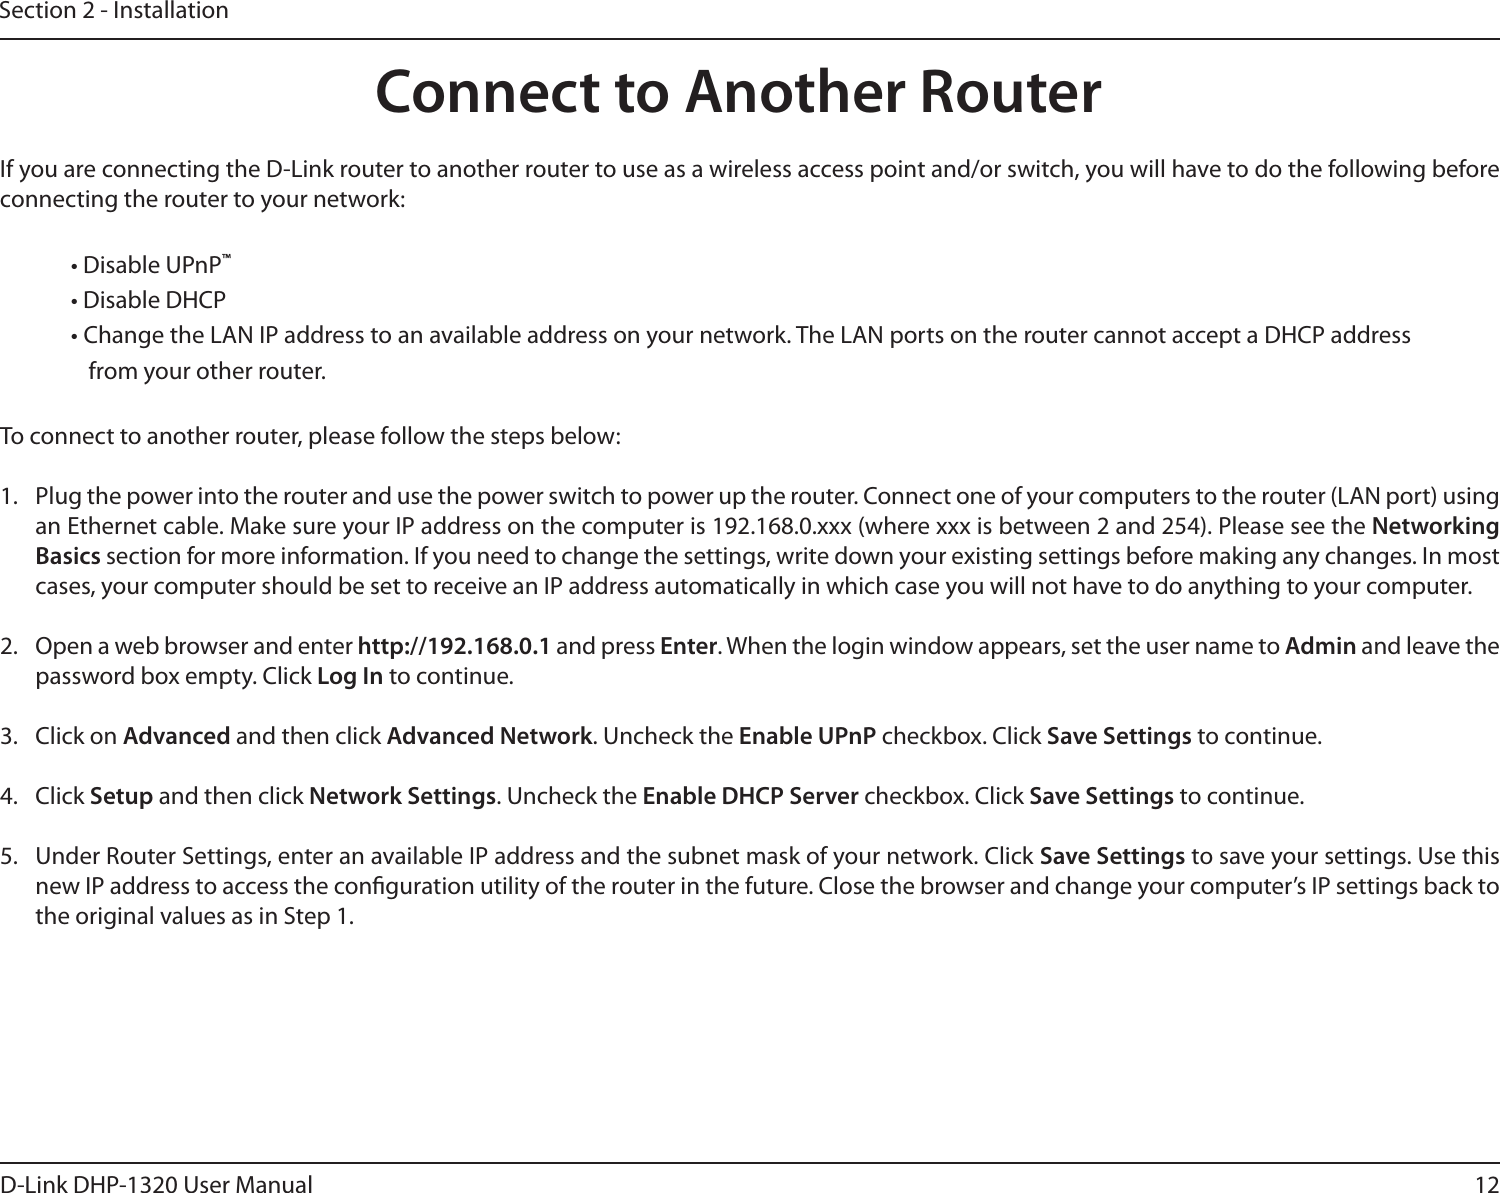 12D-Link DHP-1320 User ManualSection 2 - InstallationIf you are connecting the D-Link router to another router to use as a wireless access point and/or switch, you will have to do the following before connecting the router to your network:• Disable UPnP™• Disable DHCP• Change the LAN IP address to an available address on your network. The LAN ports on the router cannot accept a DHCP address from your other router.To connect to another router, please follow the steps below:1.  Plug the power into the router and use the power switch to power up the router. Connect one of your computers to the router (LAN port) using an Ethernet cable. Make sure your IP address on the computer is 192.168.0.xxx (where xxx is between 2 and 254). Please see the Networking Basics section for more information. If you need to change the settings, write down your existing settings before making any changes. In most cases, your computer should be set to receive an IP address automatically in which case you will not have to do anything to your computer.2.  Open a web browser and enter http://192.168.0.1 and press Enter. When the login window appears, set the user name to Admin and leave the password box empty. Click Log In to continue.3.  Click on Advanced and then click Advanced Network. Uncheck the Enable UPnP checkbox. Click Save Settings to continue. 4.  Click Setup and then click Network Settings. Uncheck the Enable DHCP Server checkbox. Click Save Settings to continue.5.  Under Router Settings, enter an available IP address and the subnet mask of your network. Click Save Settings to save your settings. Use this new IP address to access the conguration utility of the router in the future. Close the browser and change your computer’s IP settings back to the original values as in Step 1.Connect to Another Router